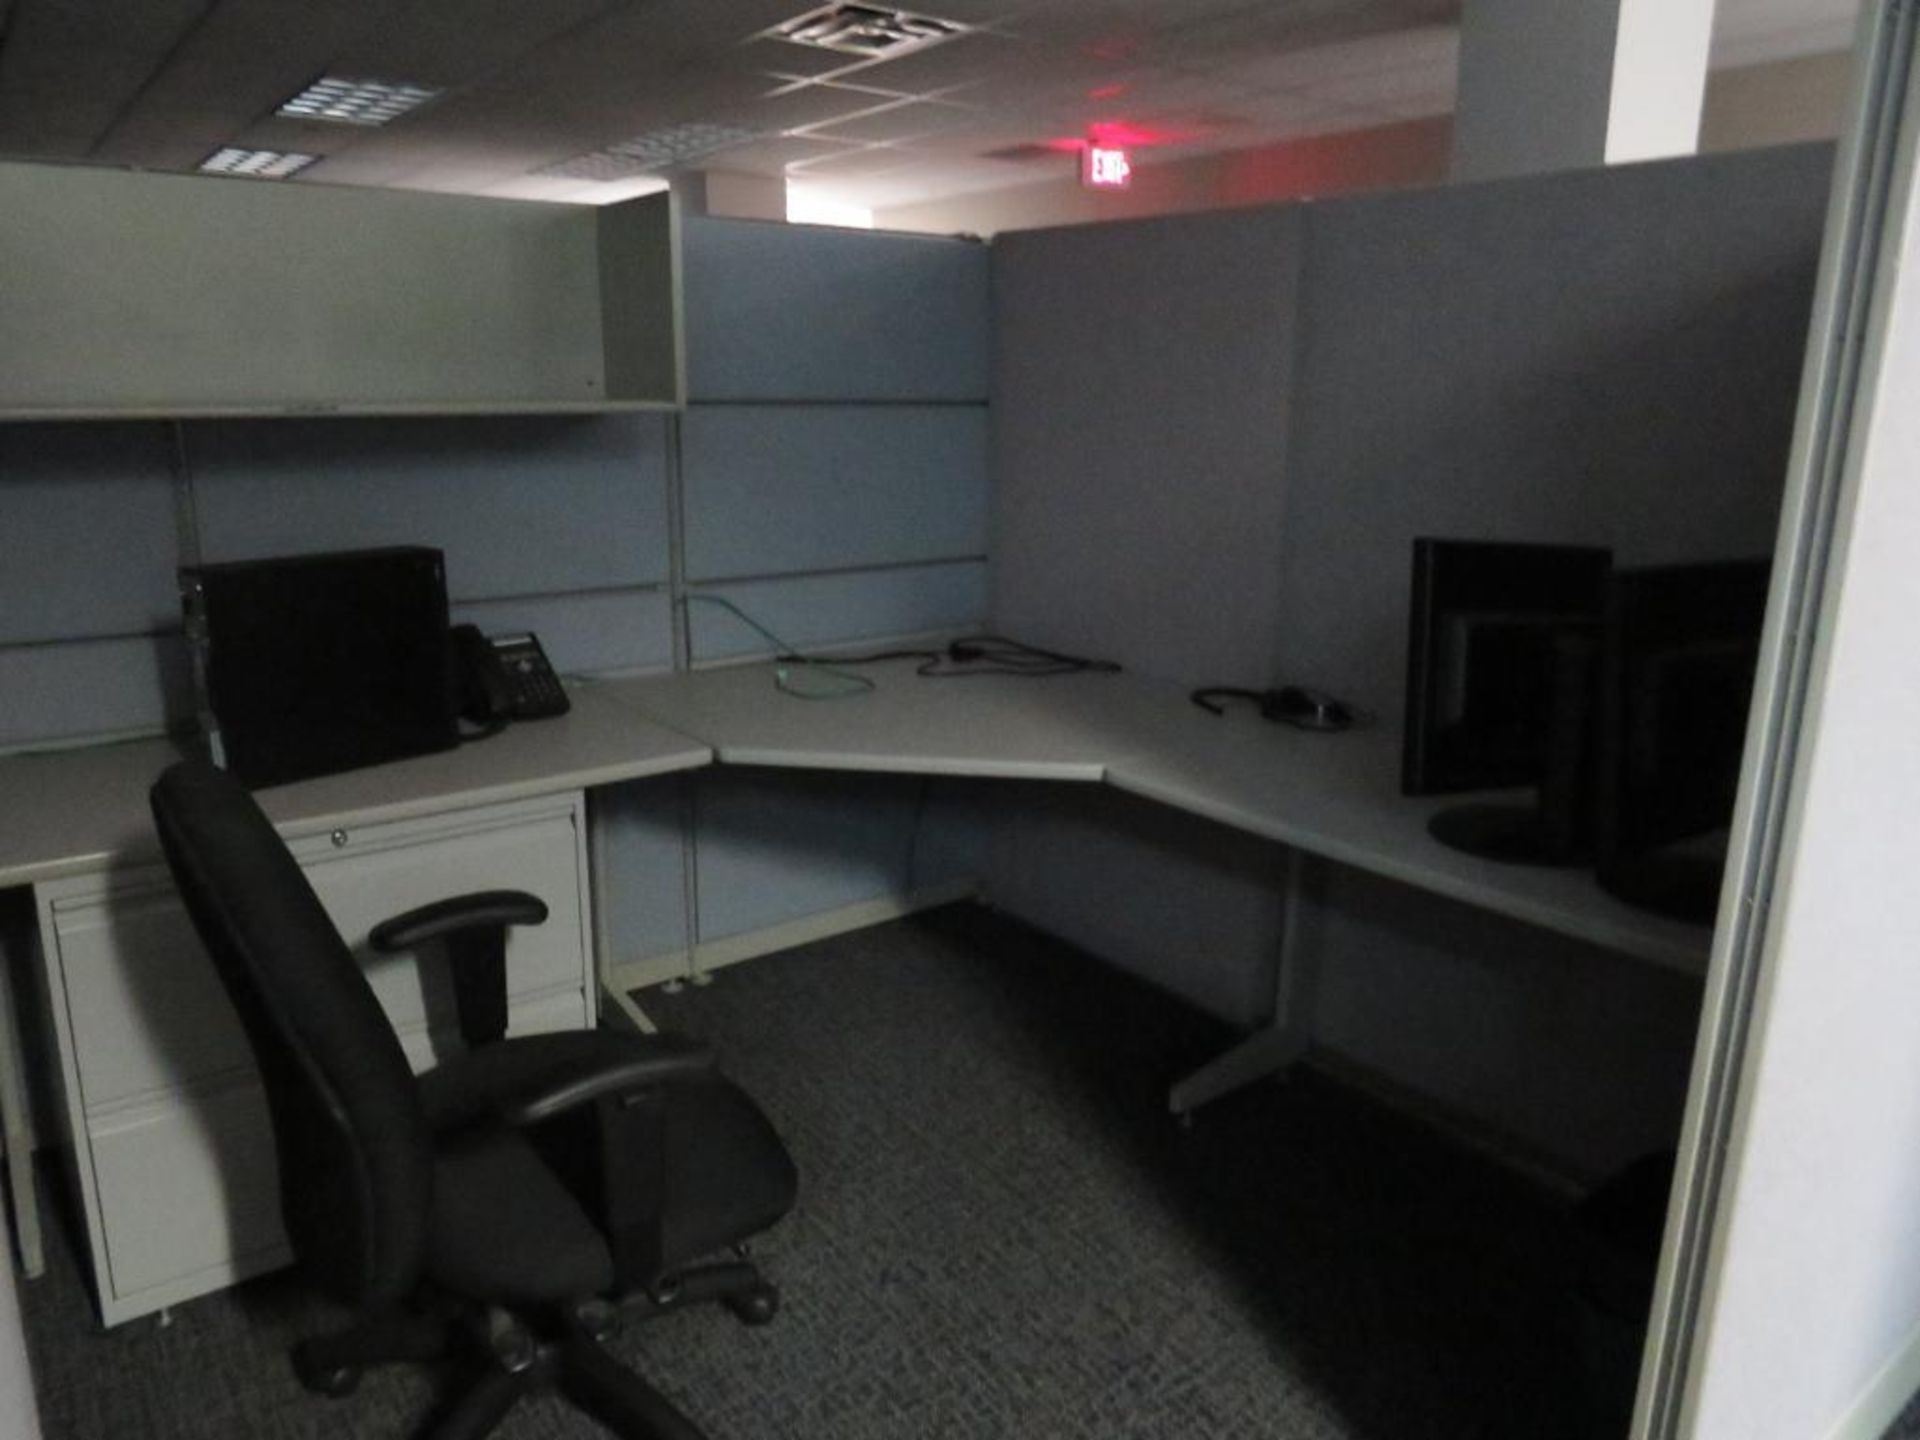 Lot c/o: Large Quantity of Cubicle Partitions w/ Hanging Work Table, on 2nd Floor Approx. 7,100 Sq. - Image 4 of 8